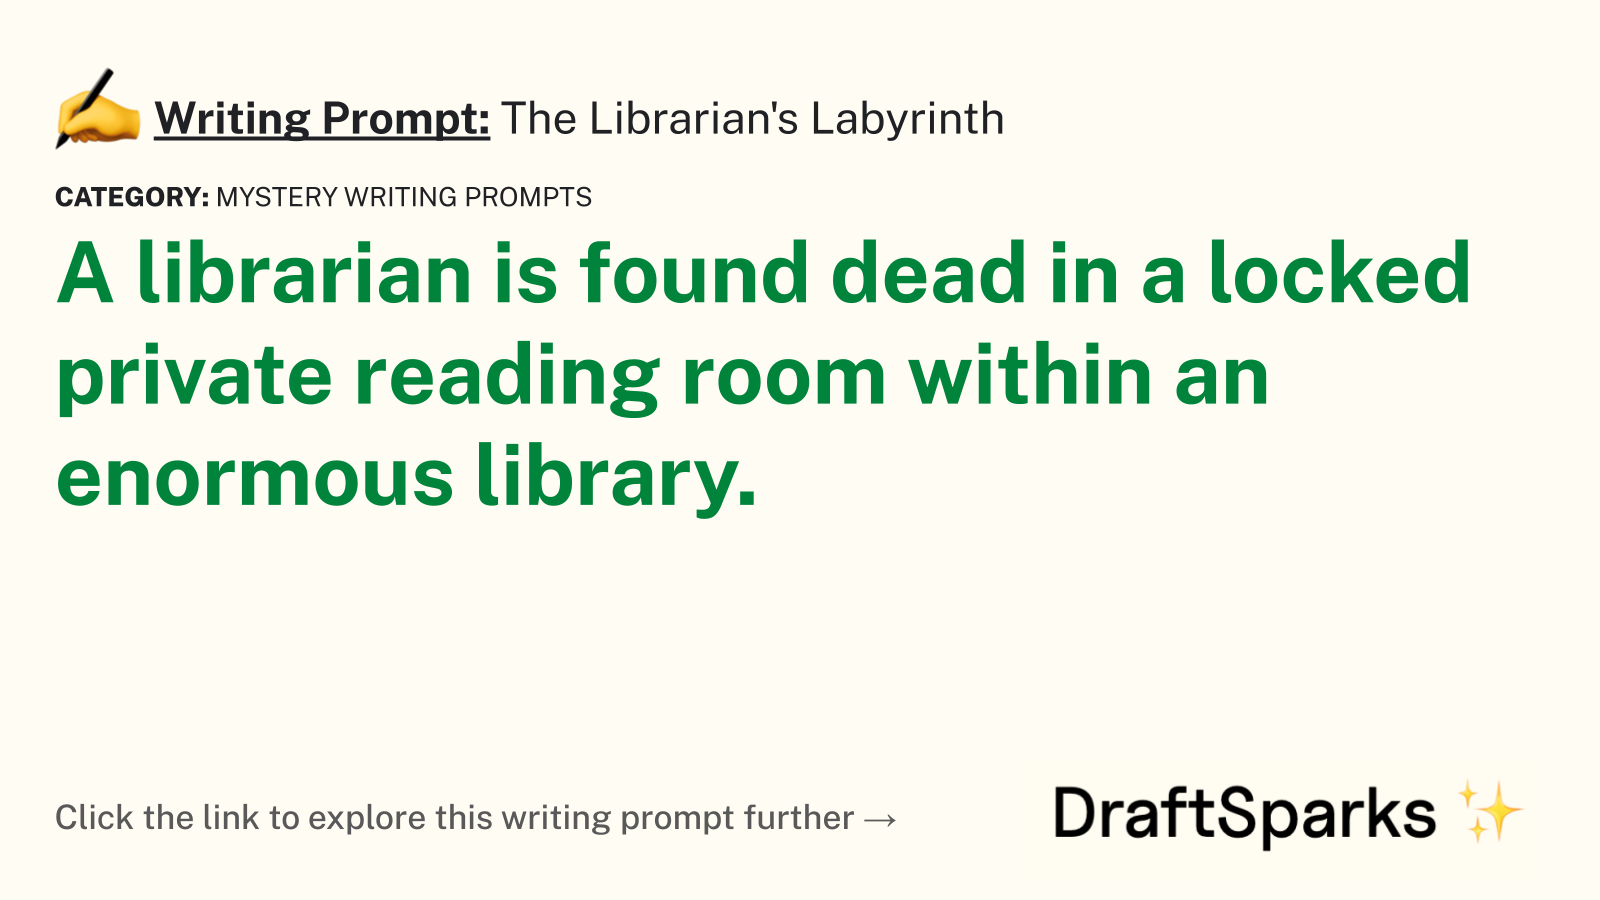 The Librarian’s Labyrinth